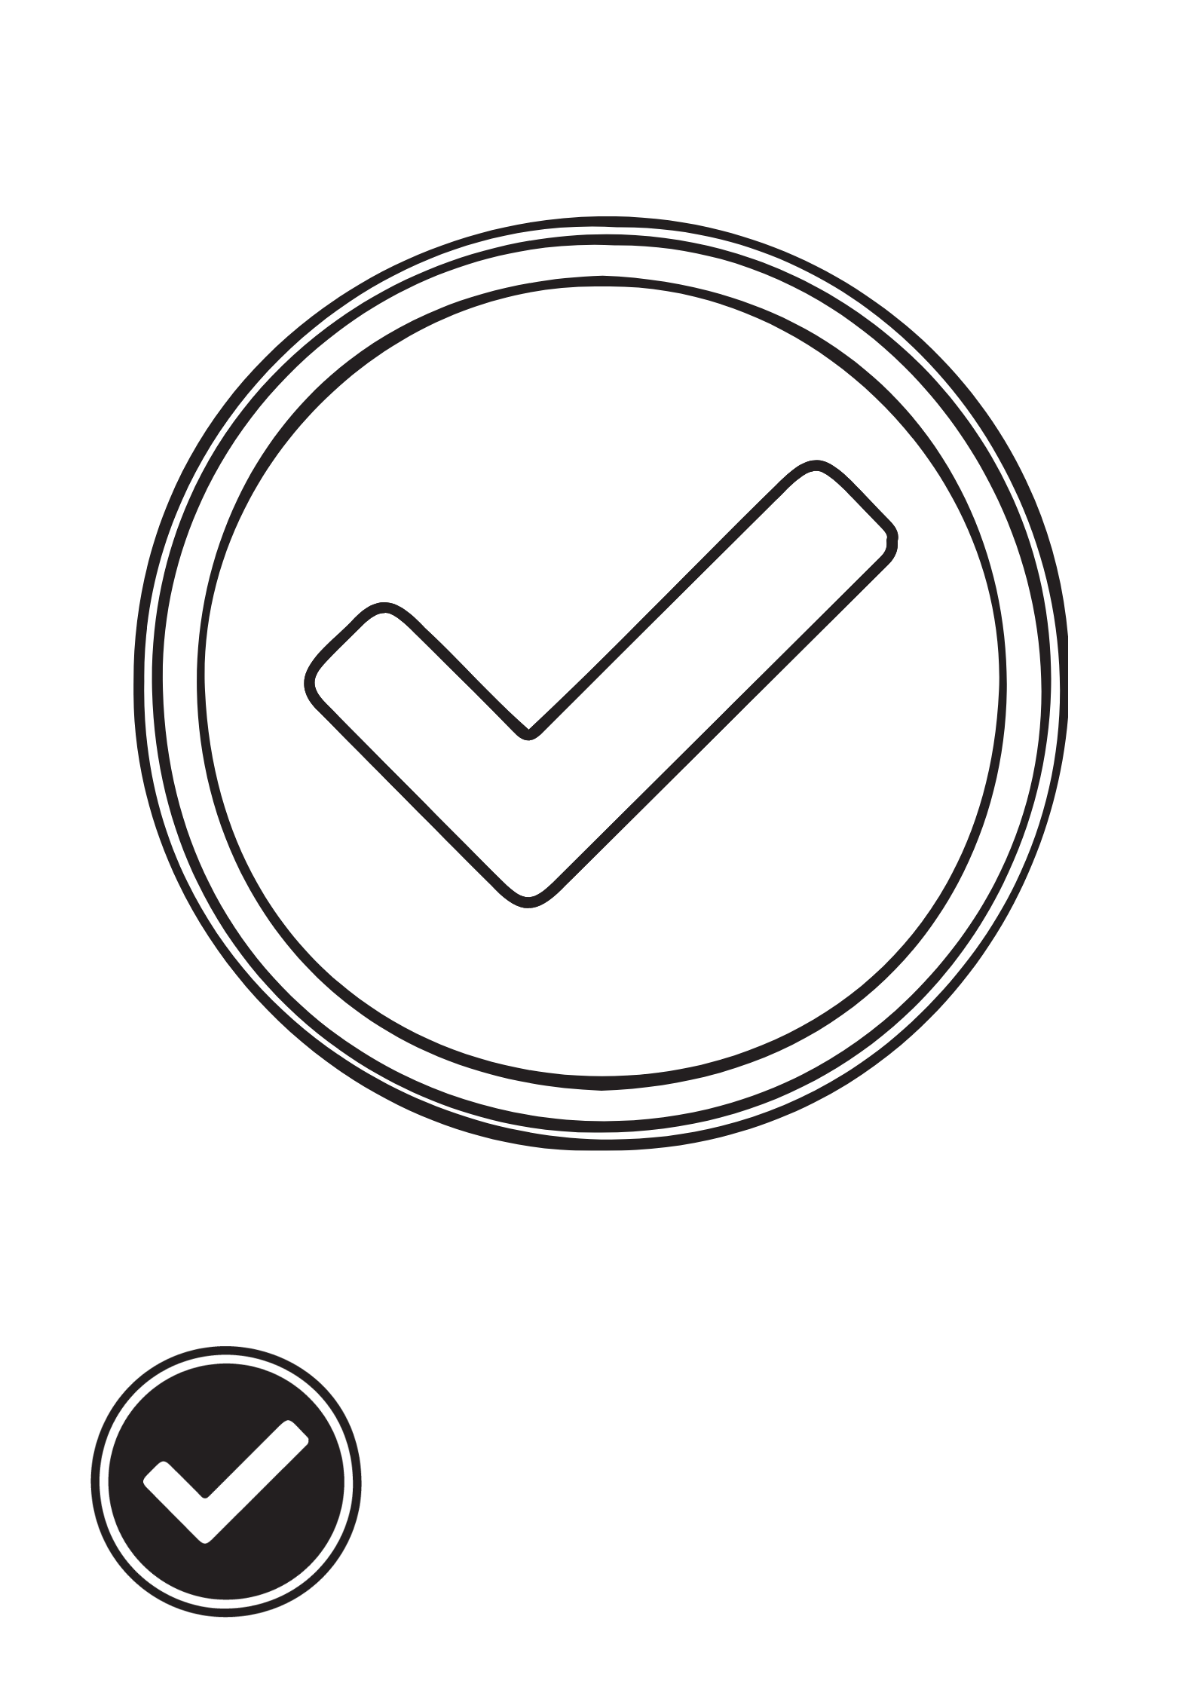 Free Round Black Tick Mark coloring page Template